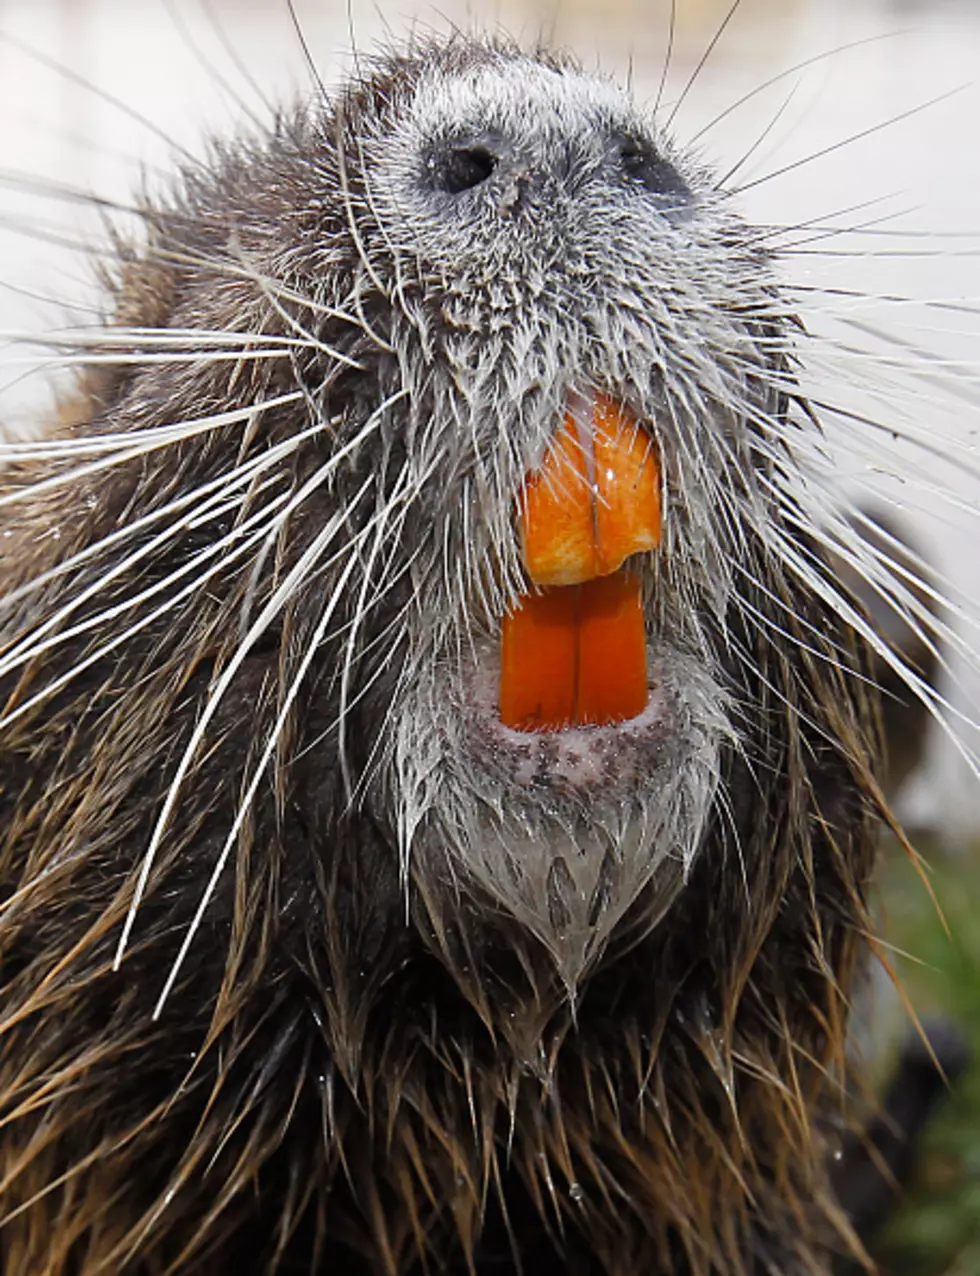 Hunters Can Now Make More Money Bagging Nutria